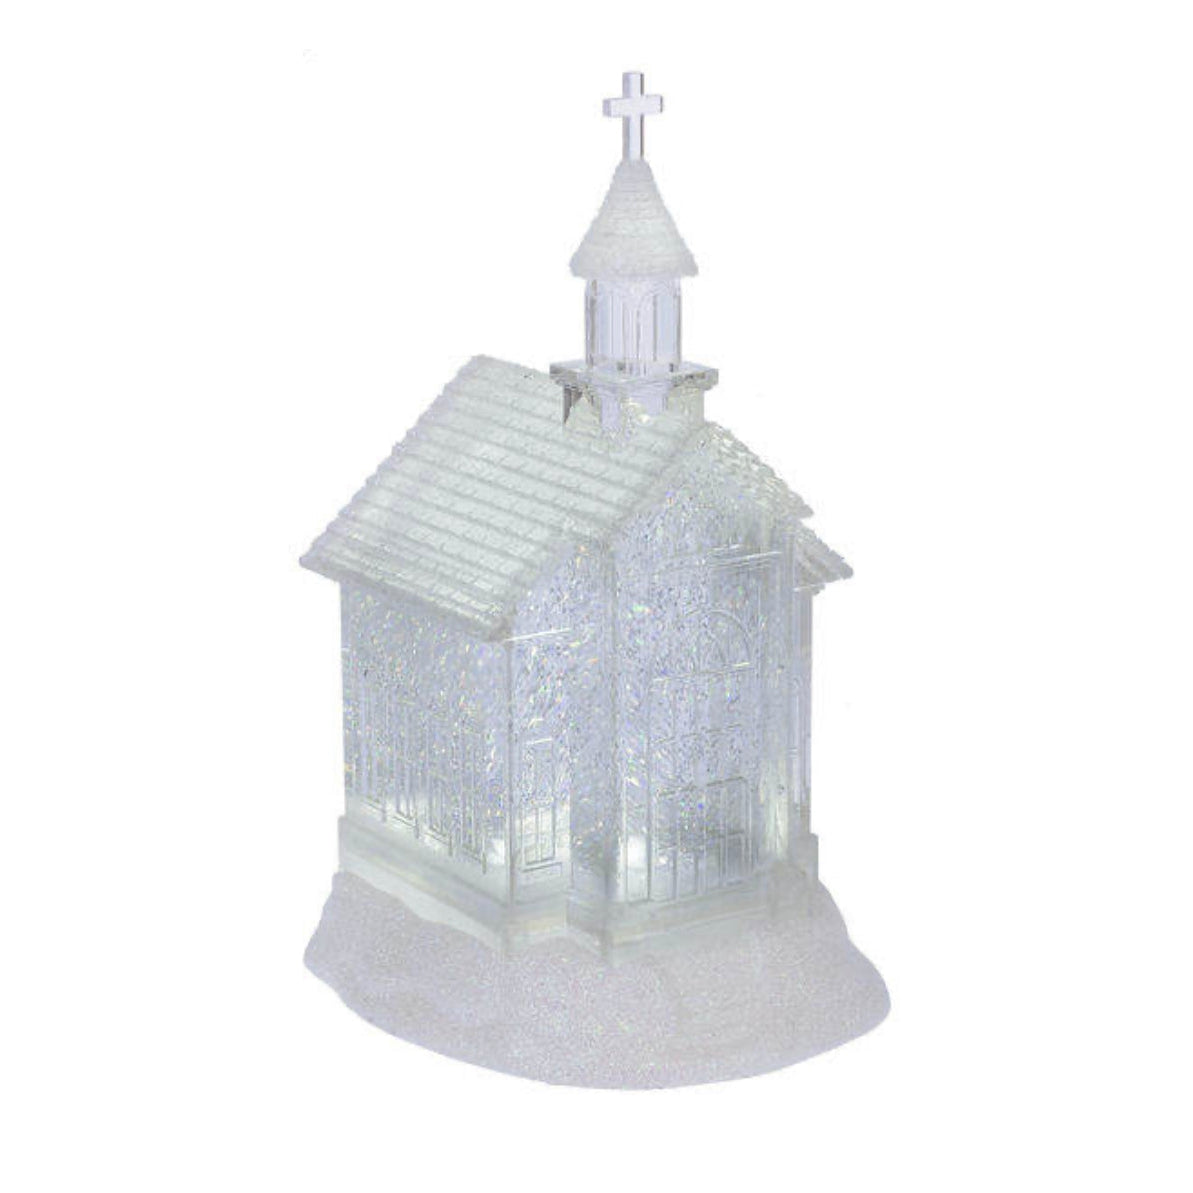 Lighted LED Battery Operated Shimmer Church